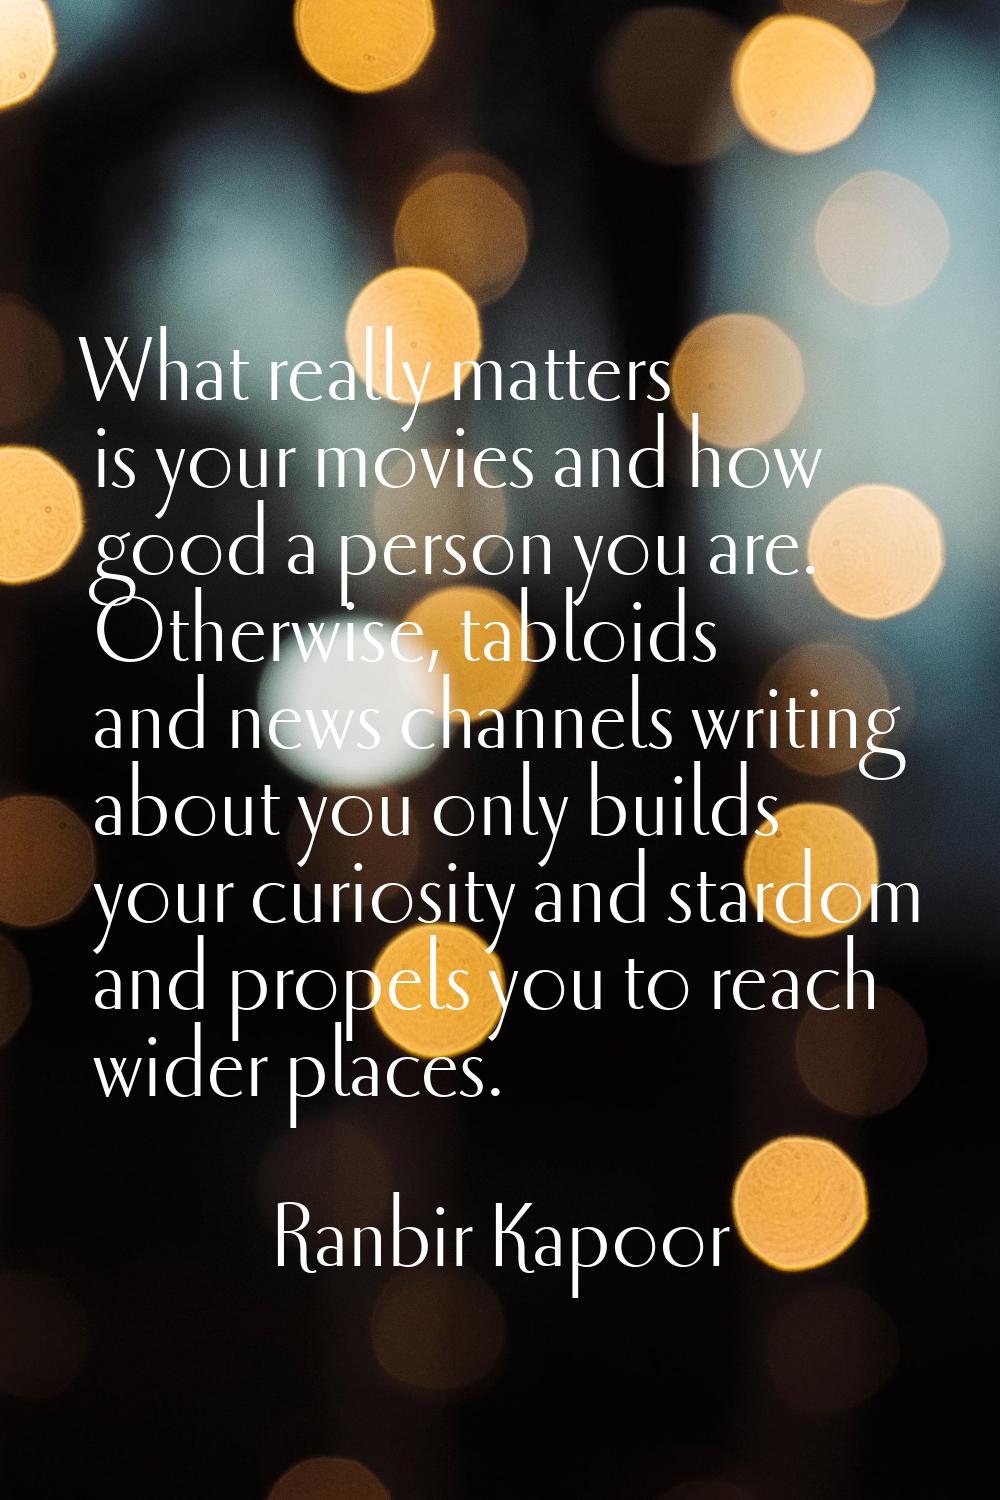 What really matters is your movies and how good a person you are. Otherwise, tabloids and news chan